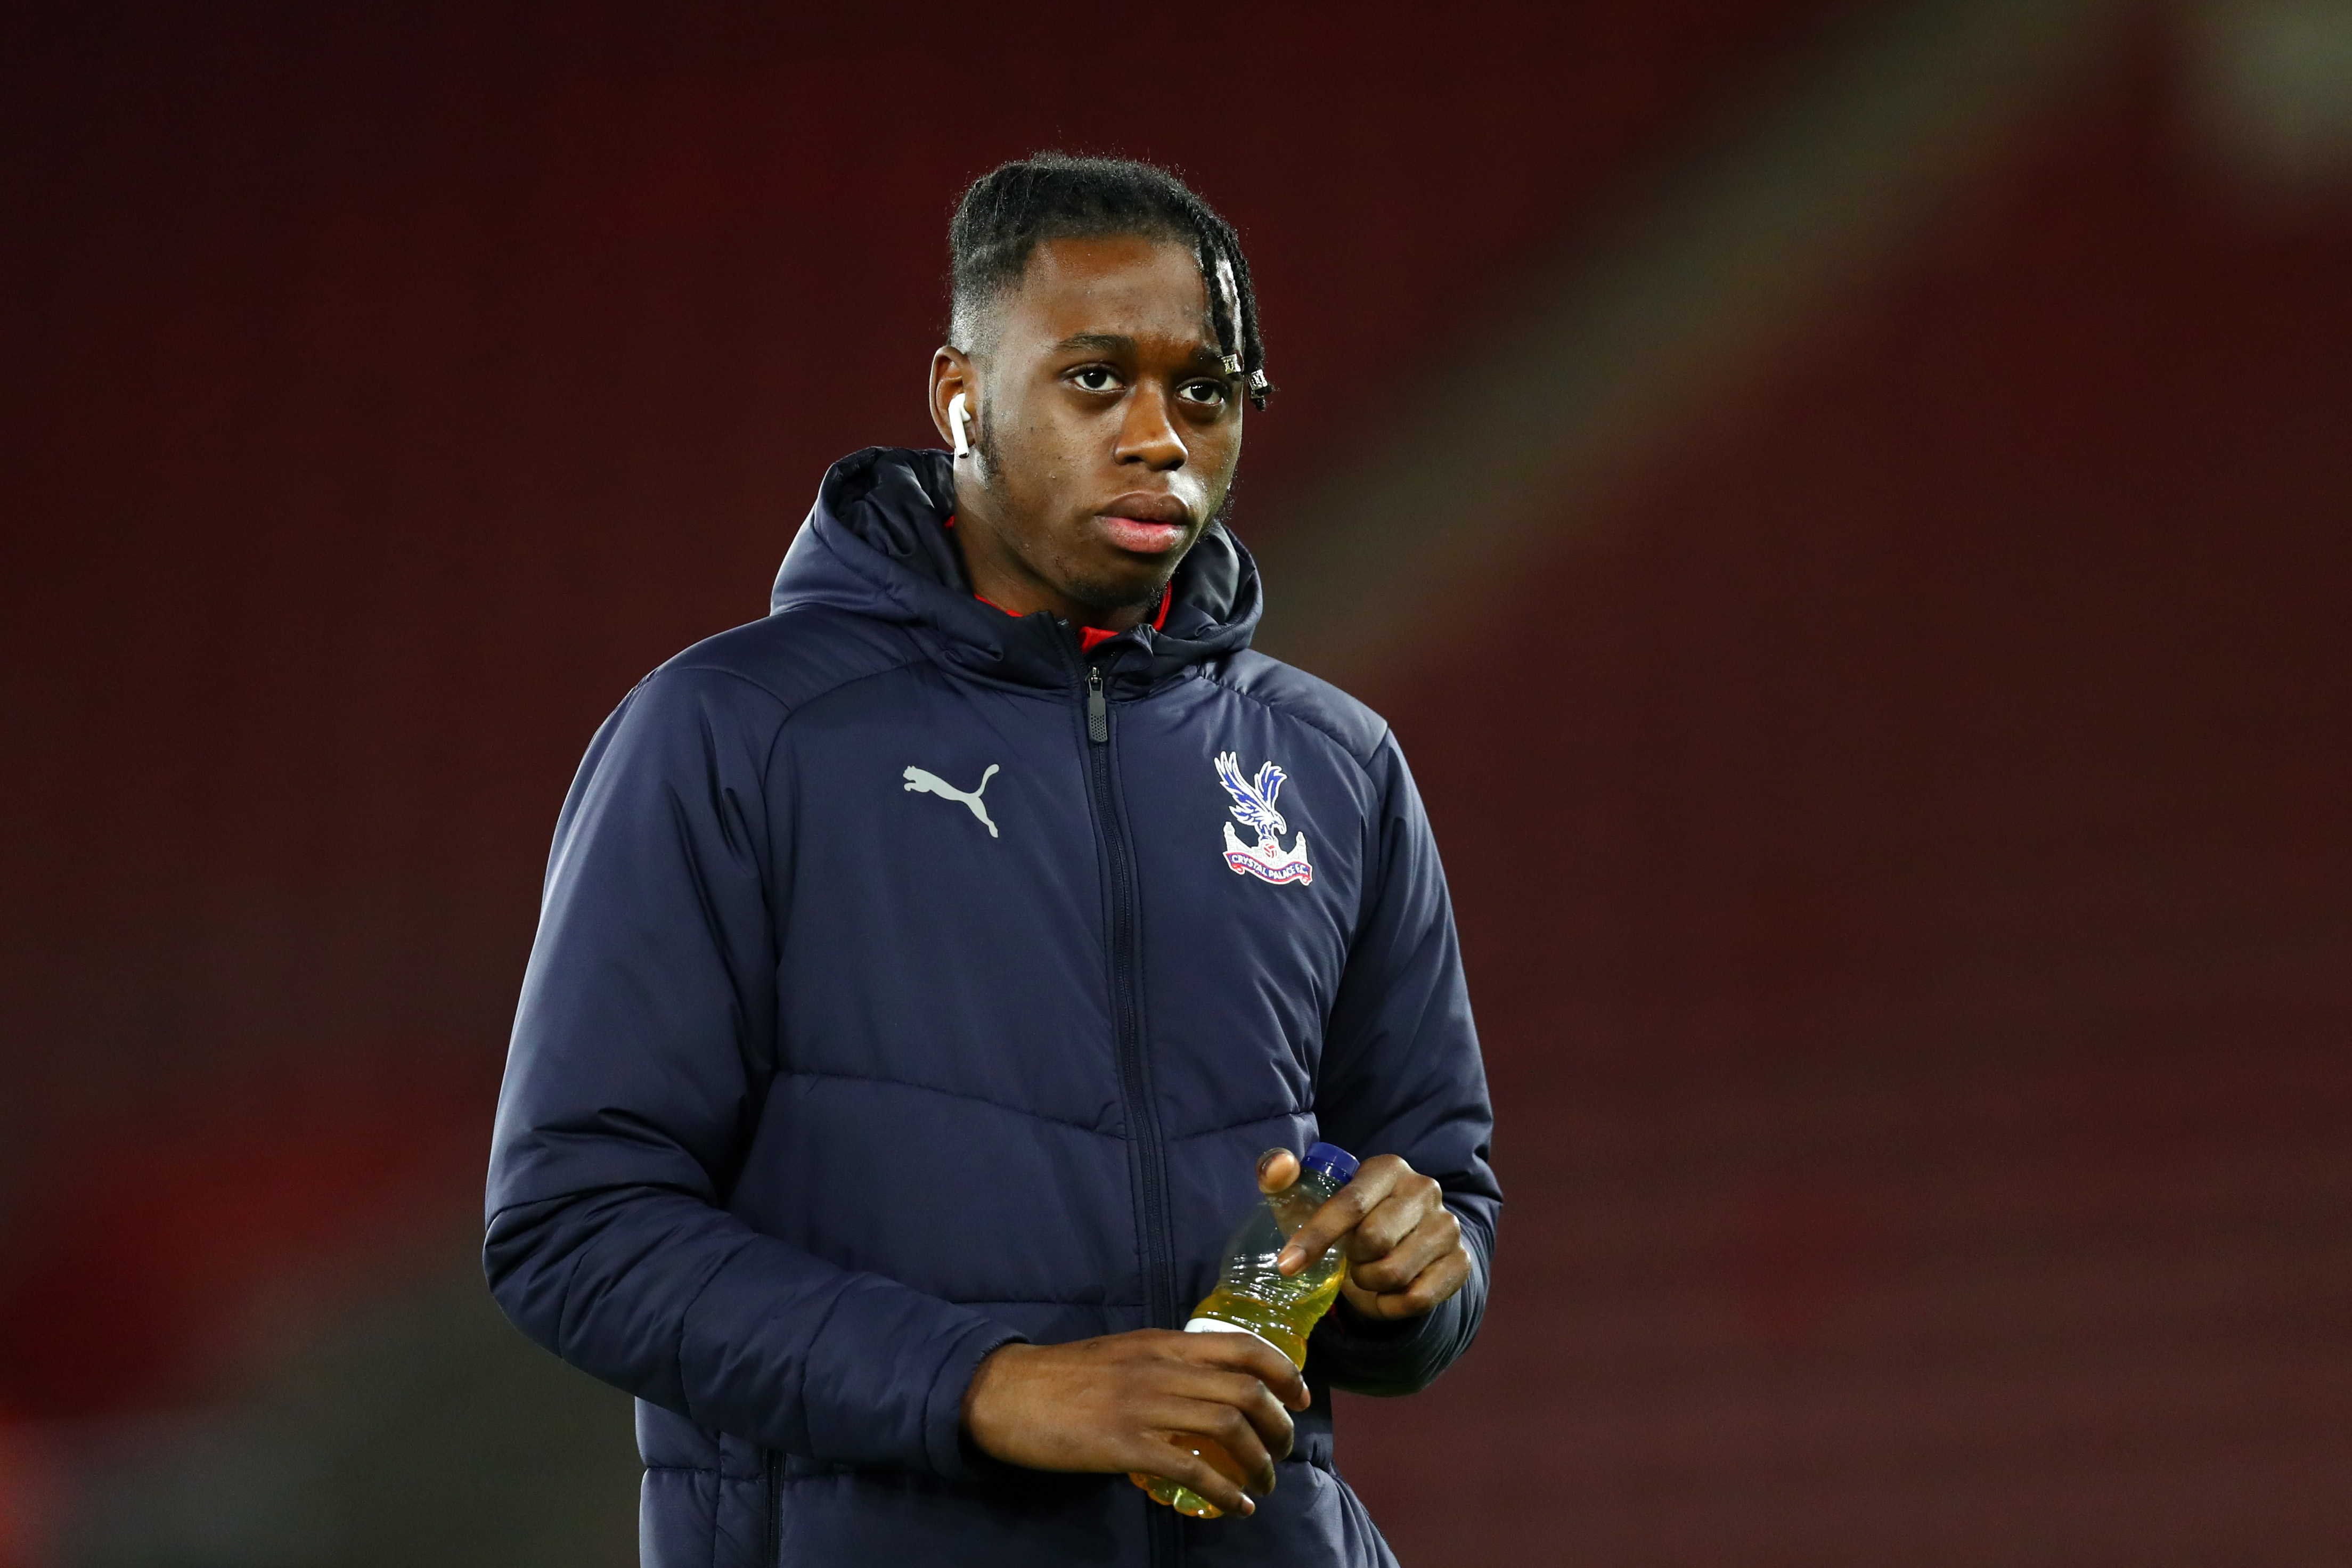 SOUTHAMPTON, ENGLAND - JANUARY 30: Aaron Wan-Bissaka of Crystal Palace looks on prior to the Premier League match between Southampton FC and Crystal Palace at St Mary's Stadium on January 30, 2019 in Southampton, United Kingdom.  (Photo by Dan Istitene/Getty Images)